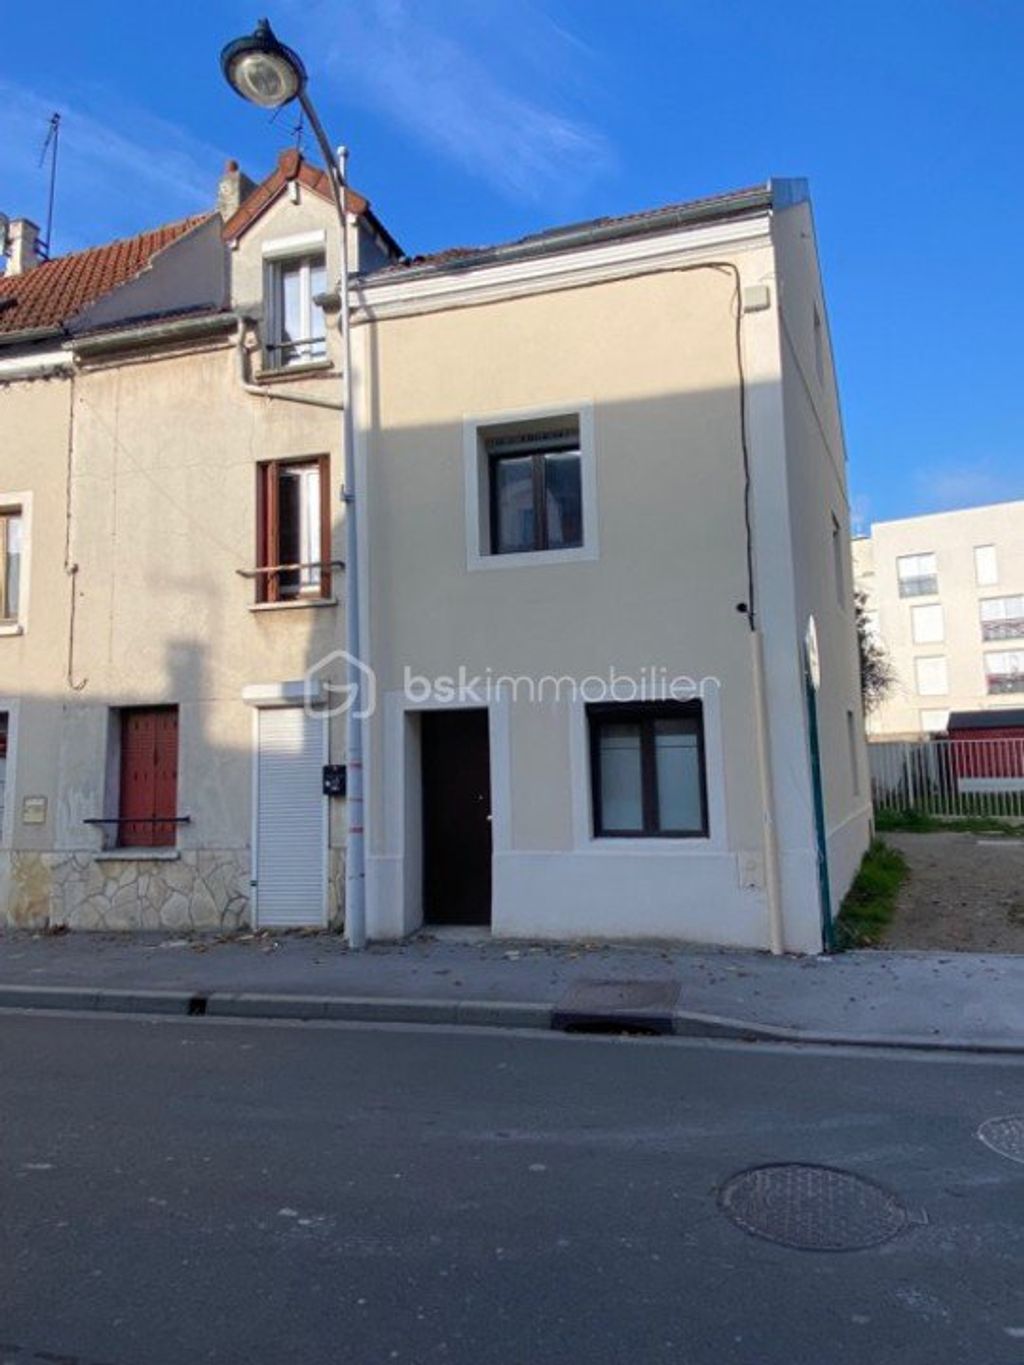 Achat maison 2 chambre(s) - Courtry